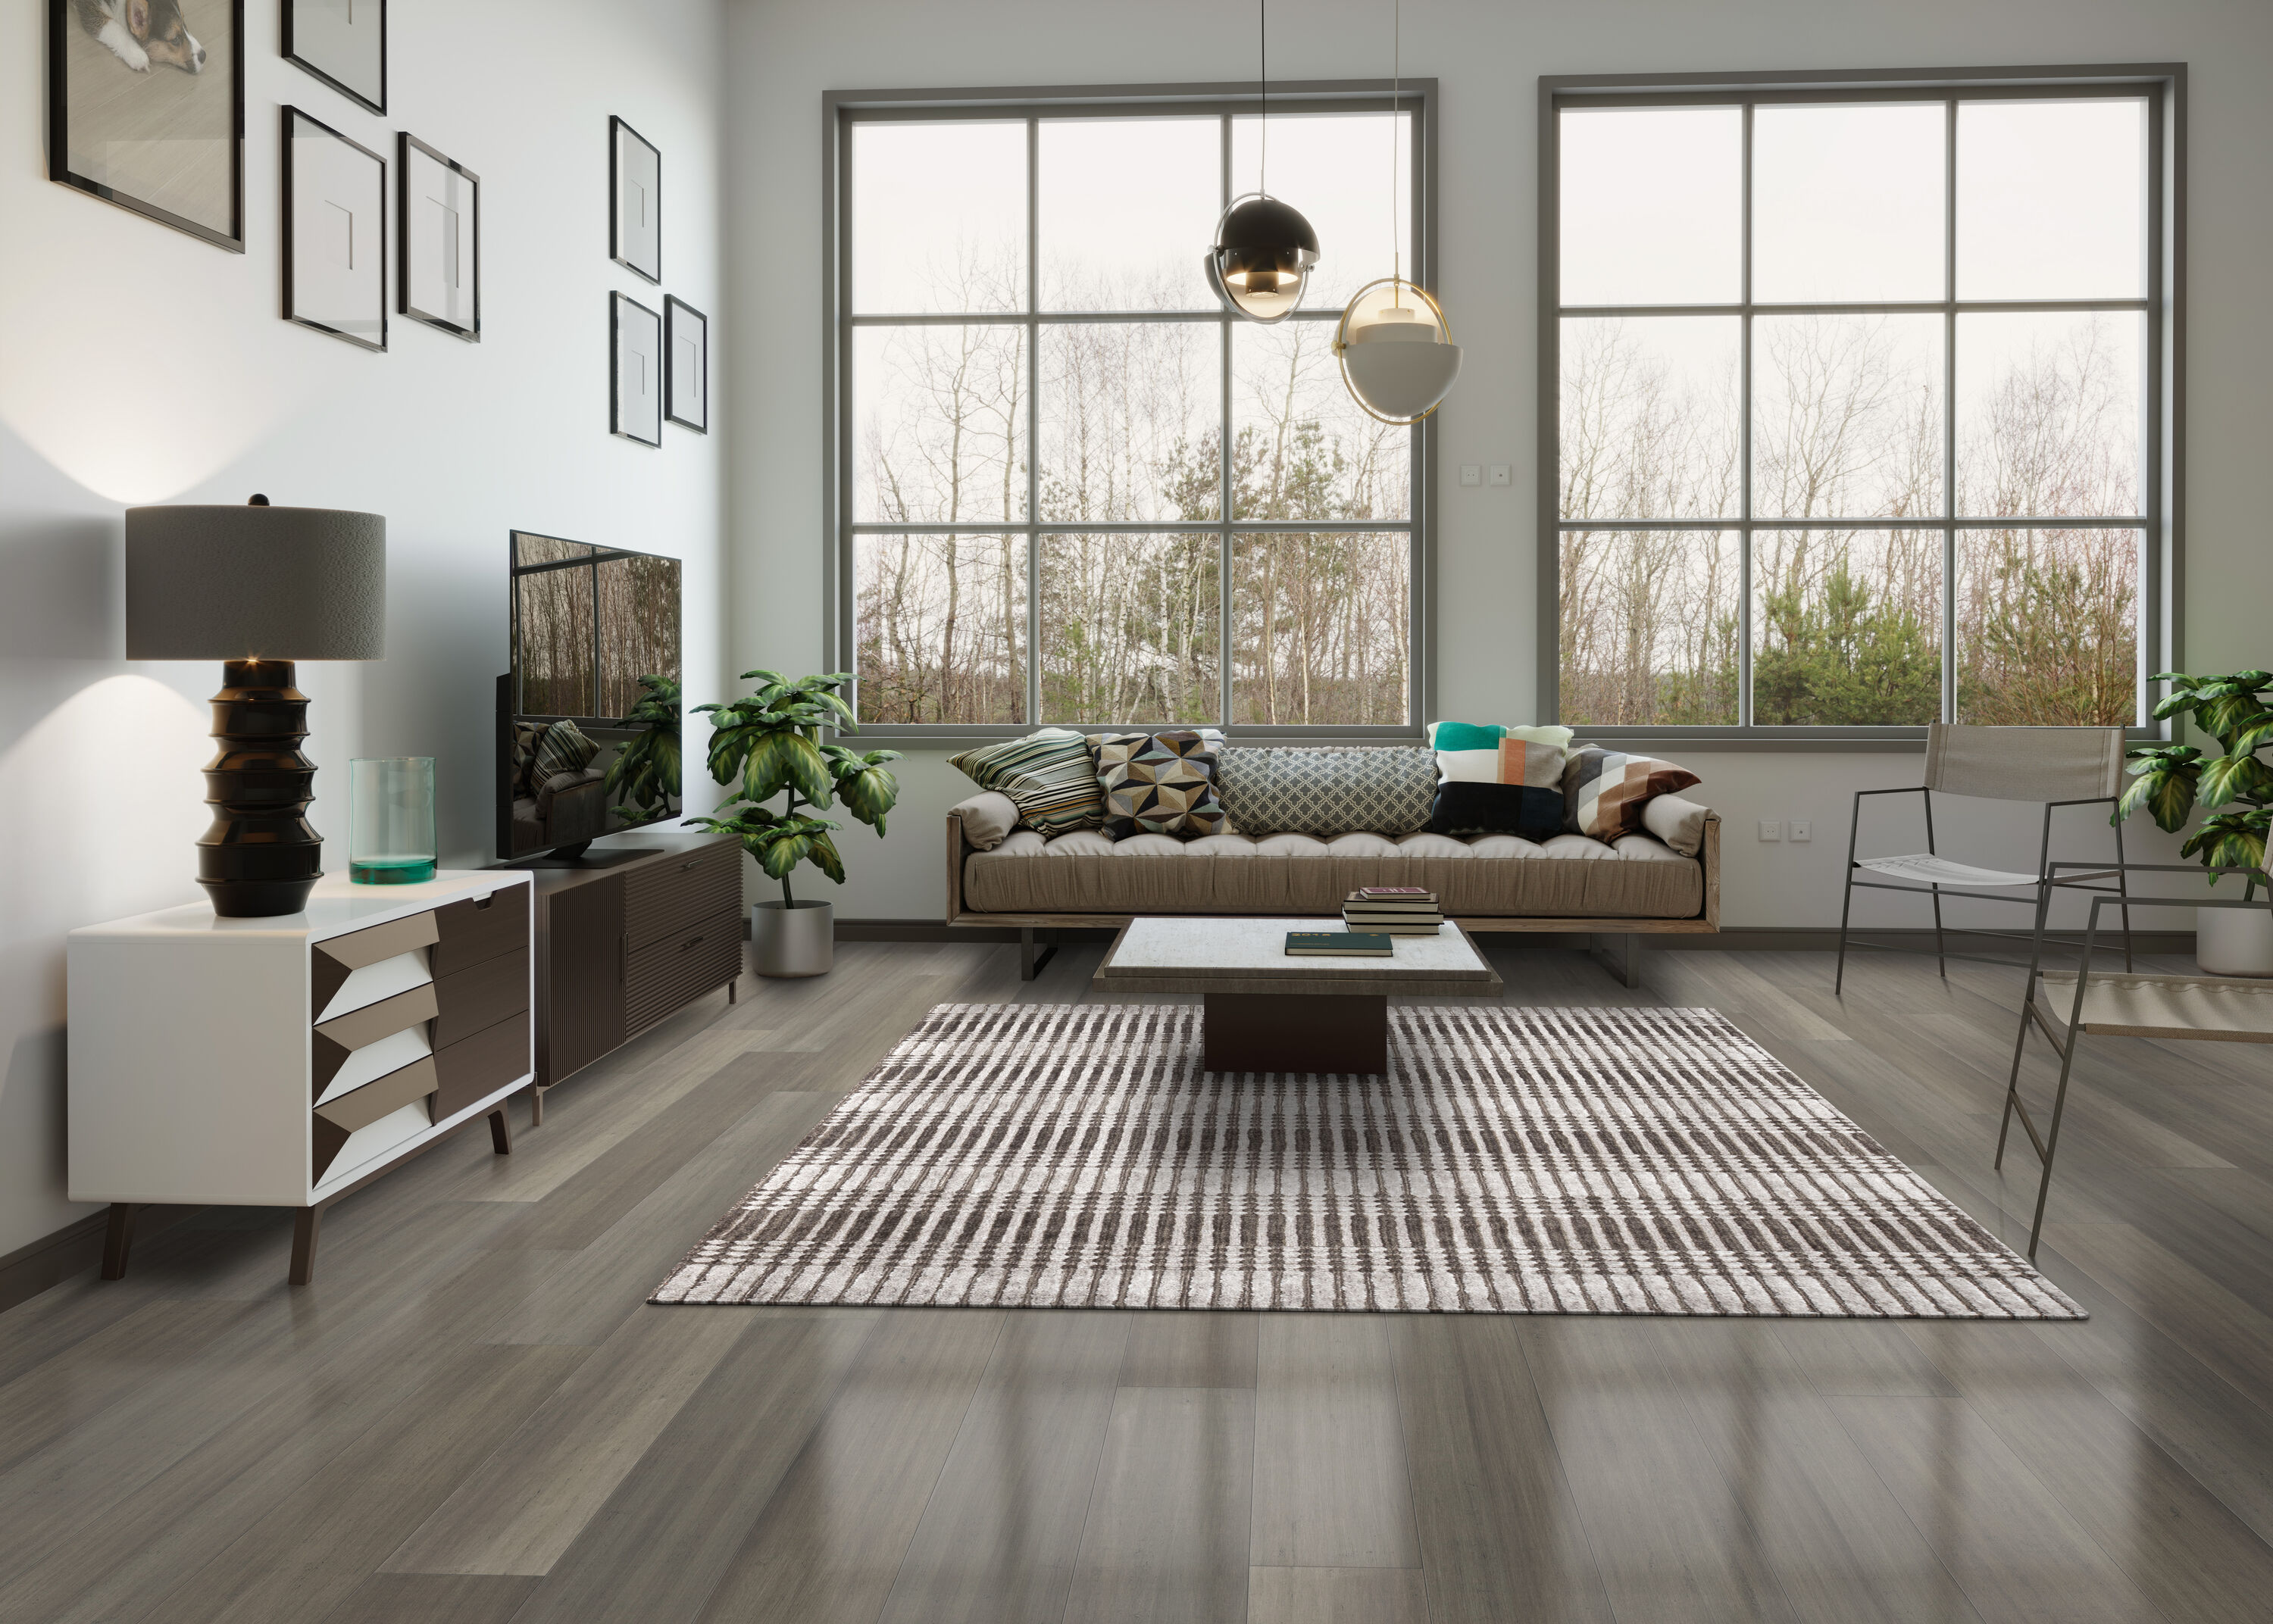 CALI Bamboo (Engineered) Regatta Bamboo 5-5/16-in W x 9/16-in T x 72-in  Smooth/Traditional Water Resistant Engineered Hardwood Flooring (21.5-sq  ft) at